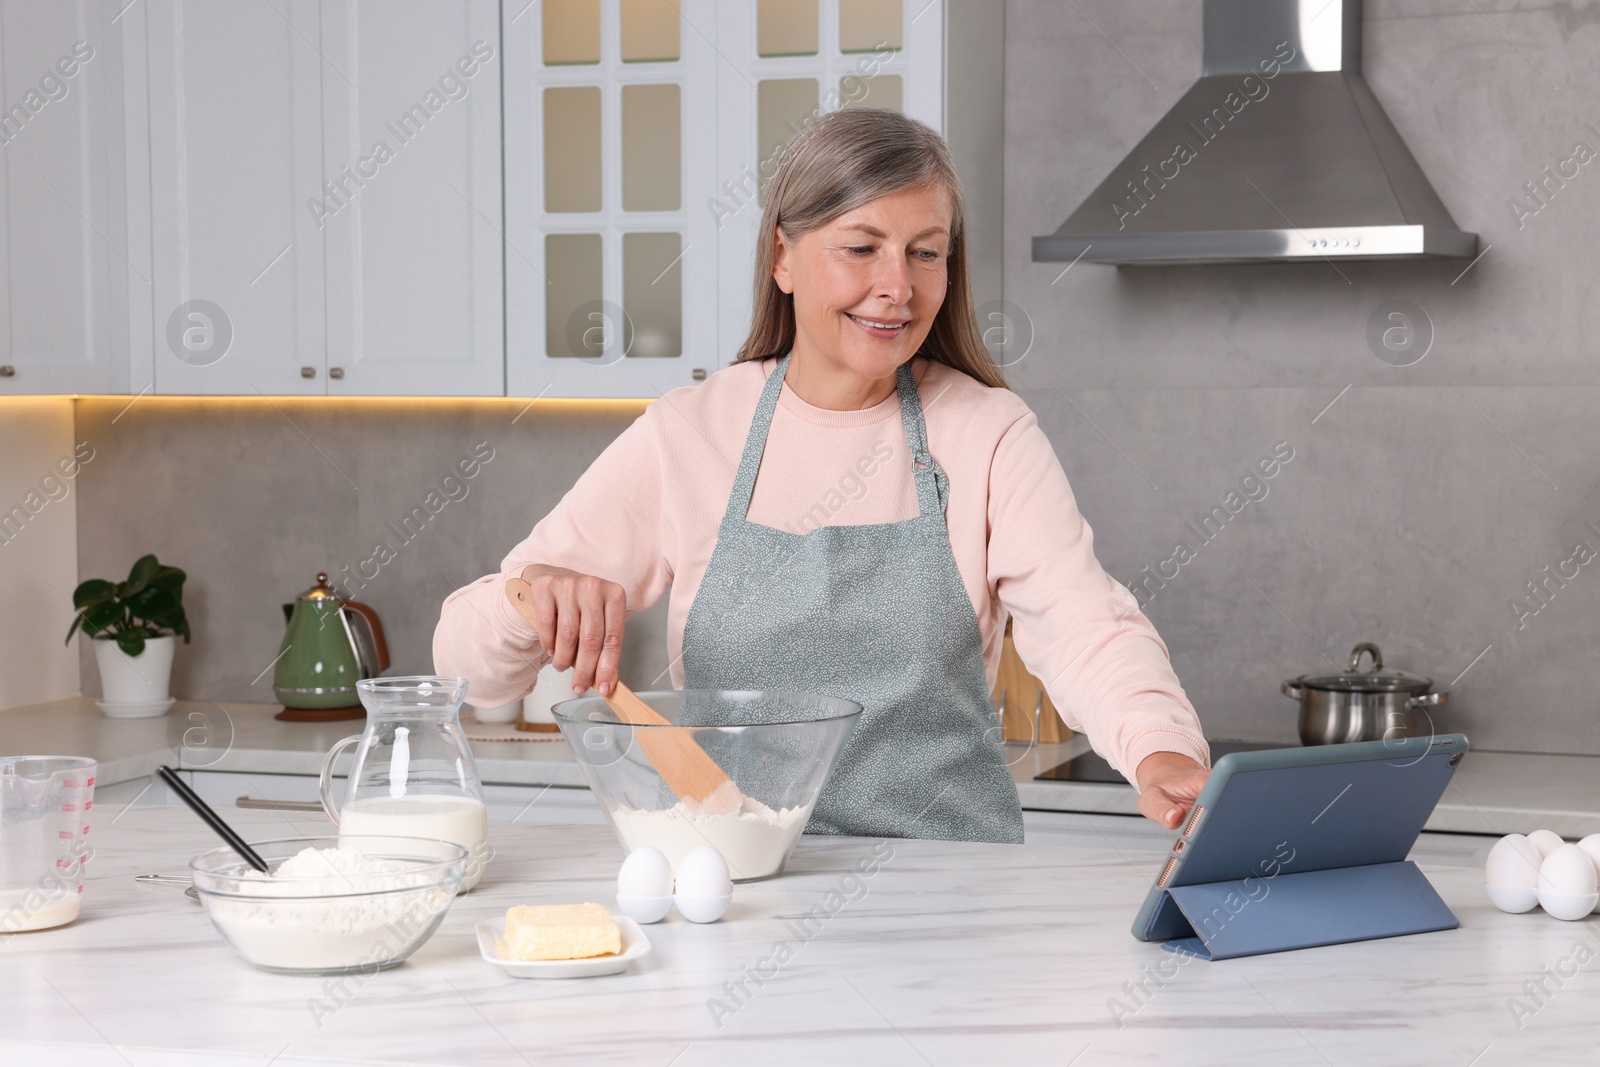 Photo of Senior woman reading recipe on tablet while cooking in kitchen. Online culinary book